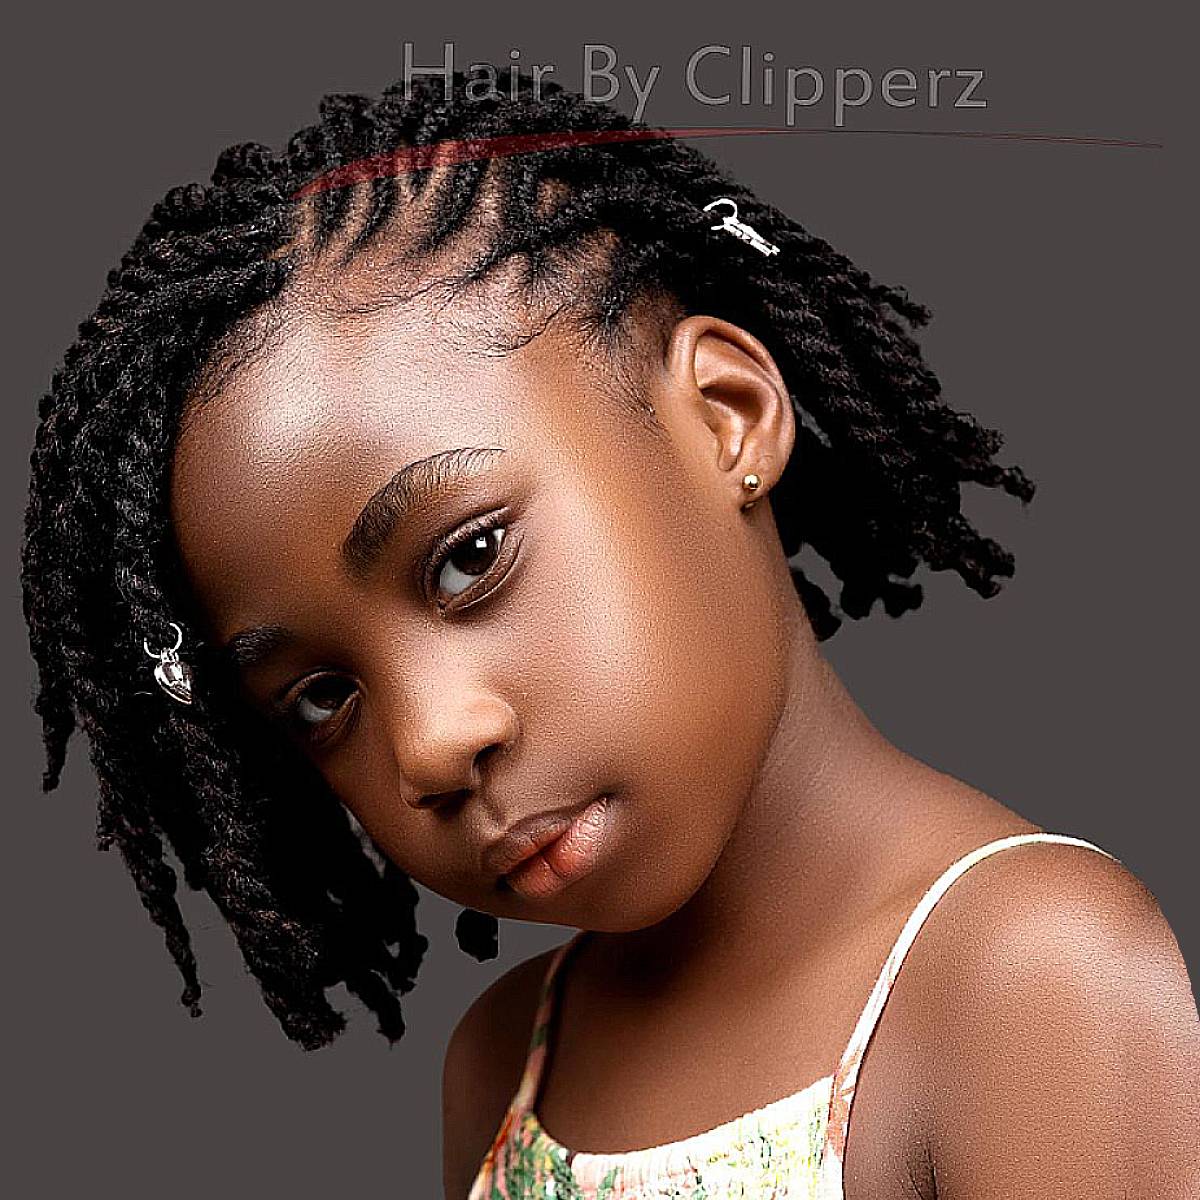 hairstyle for toddler girls